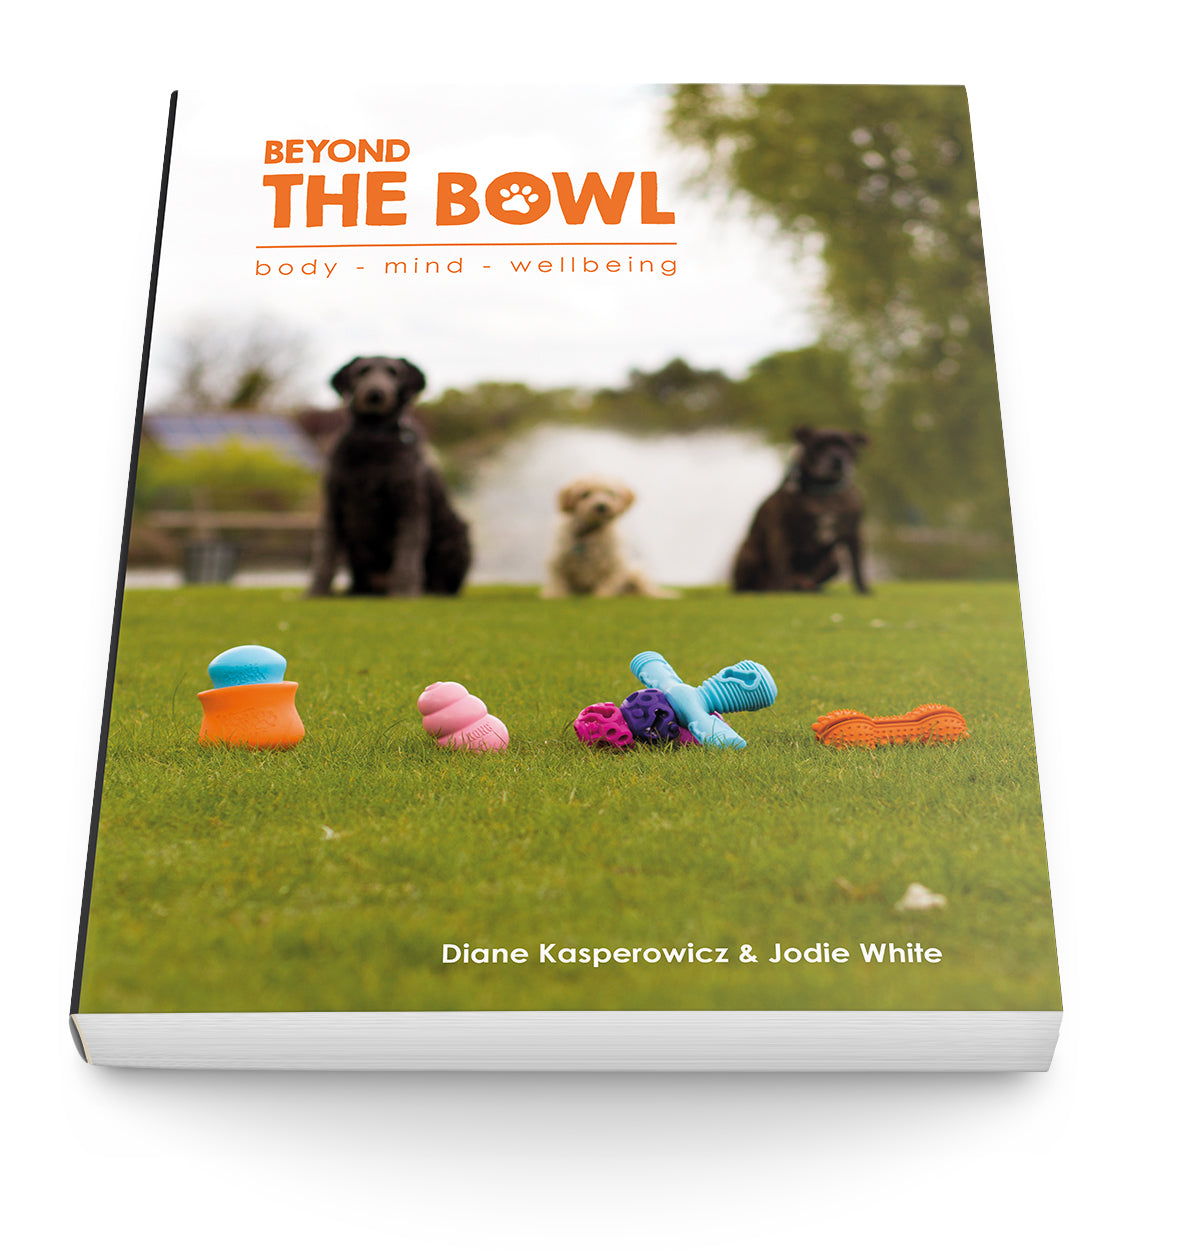 Beyond The Bowl - by Diane Kasperowicz and Jodie White